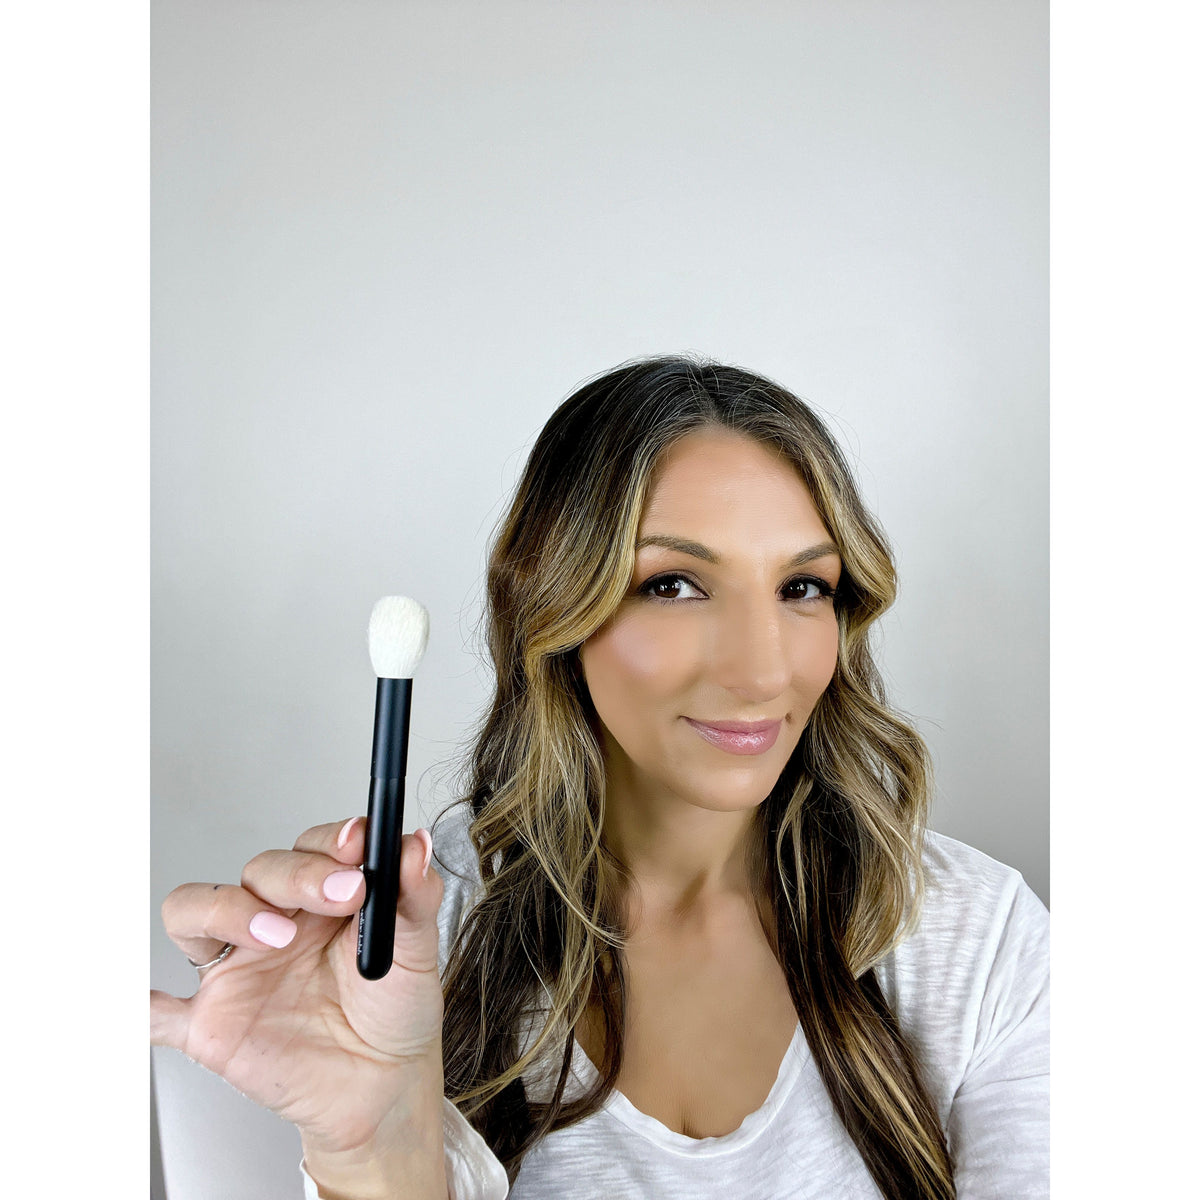 The Glow Brush - For Bronzer, Blush, and all Powders